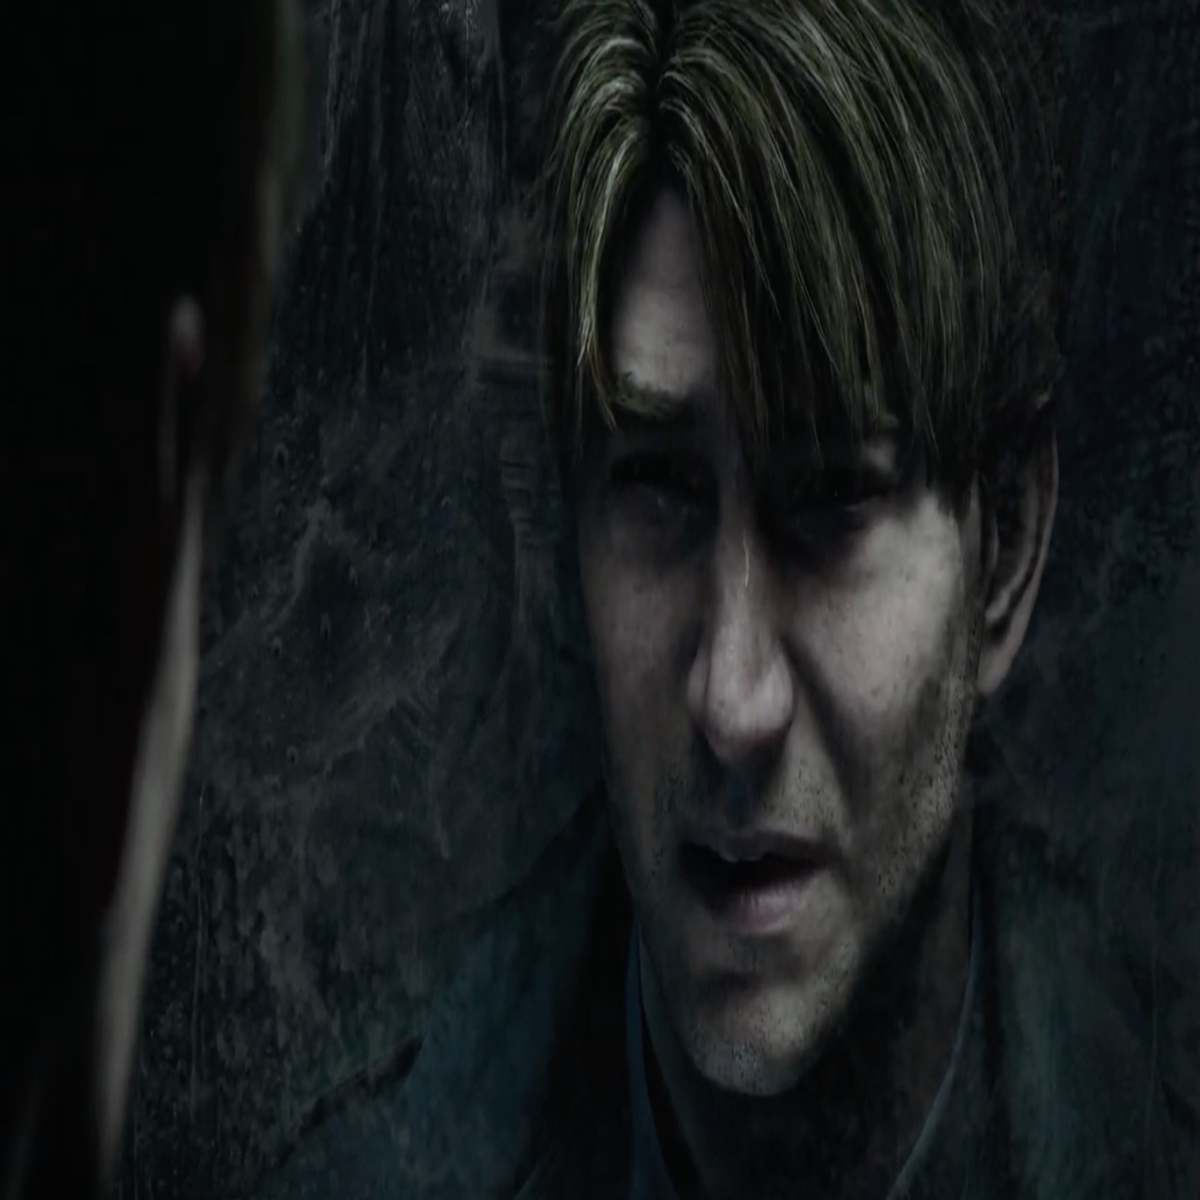 Silent Hill 2 Remake Will Be PS5 Exclusive for a Year - Report